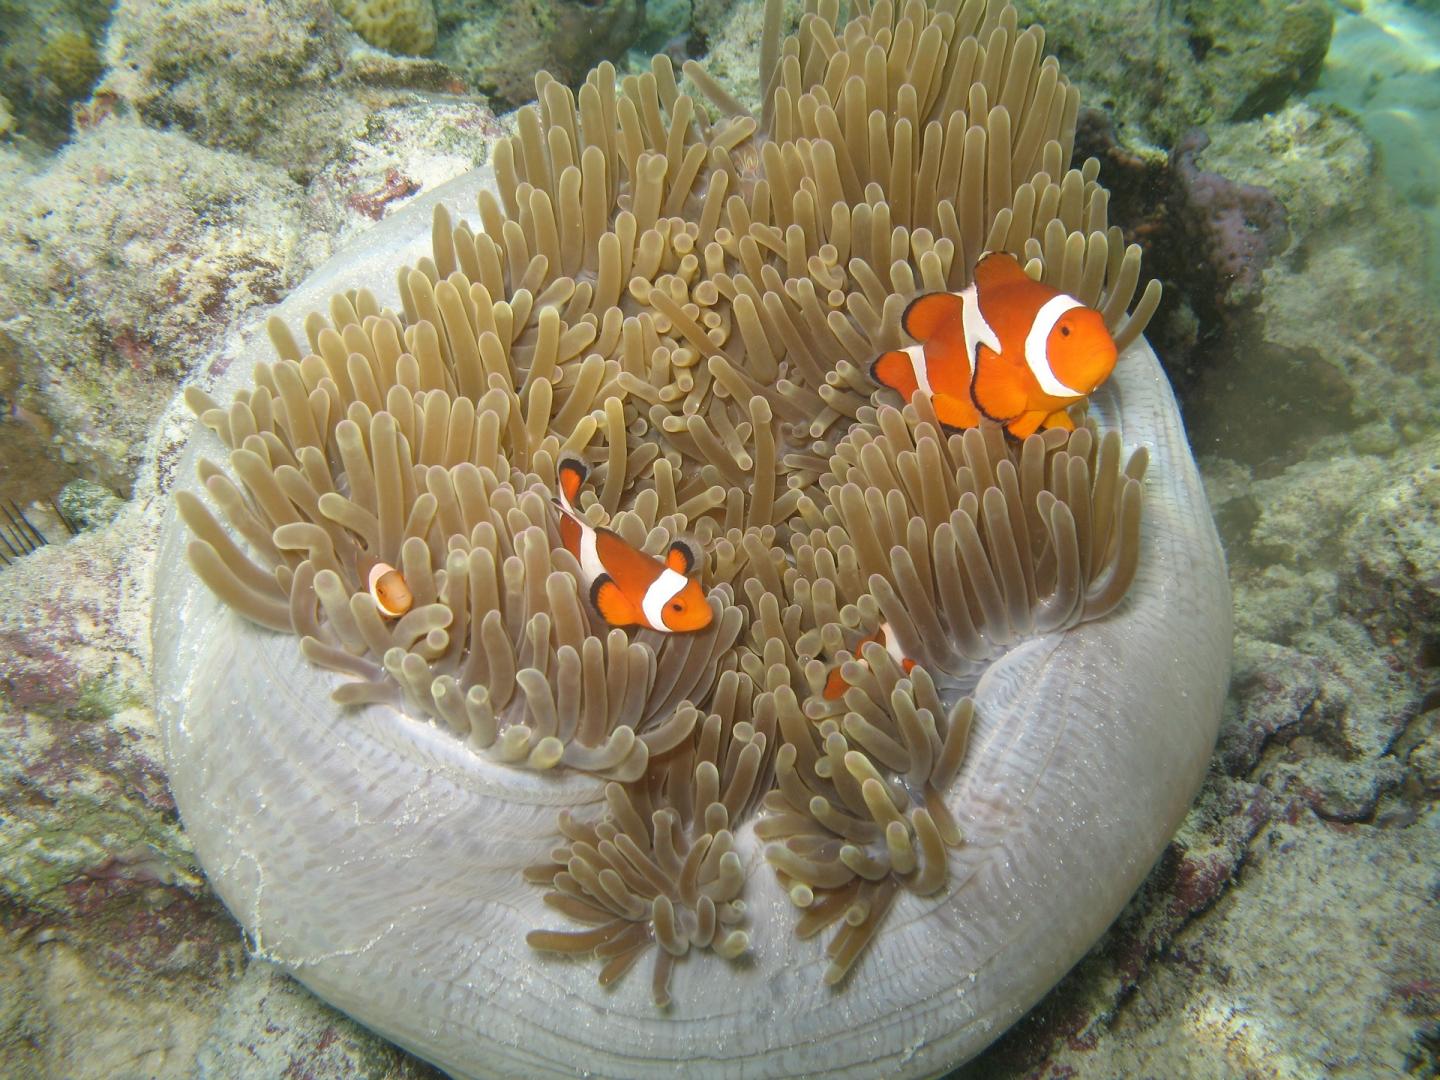 One sea anemone often hosts a group of a few clownfishes